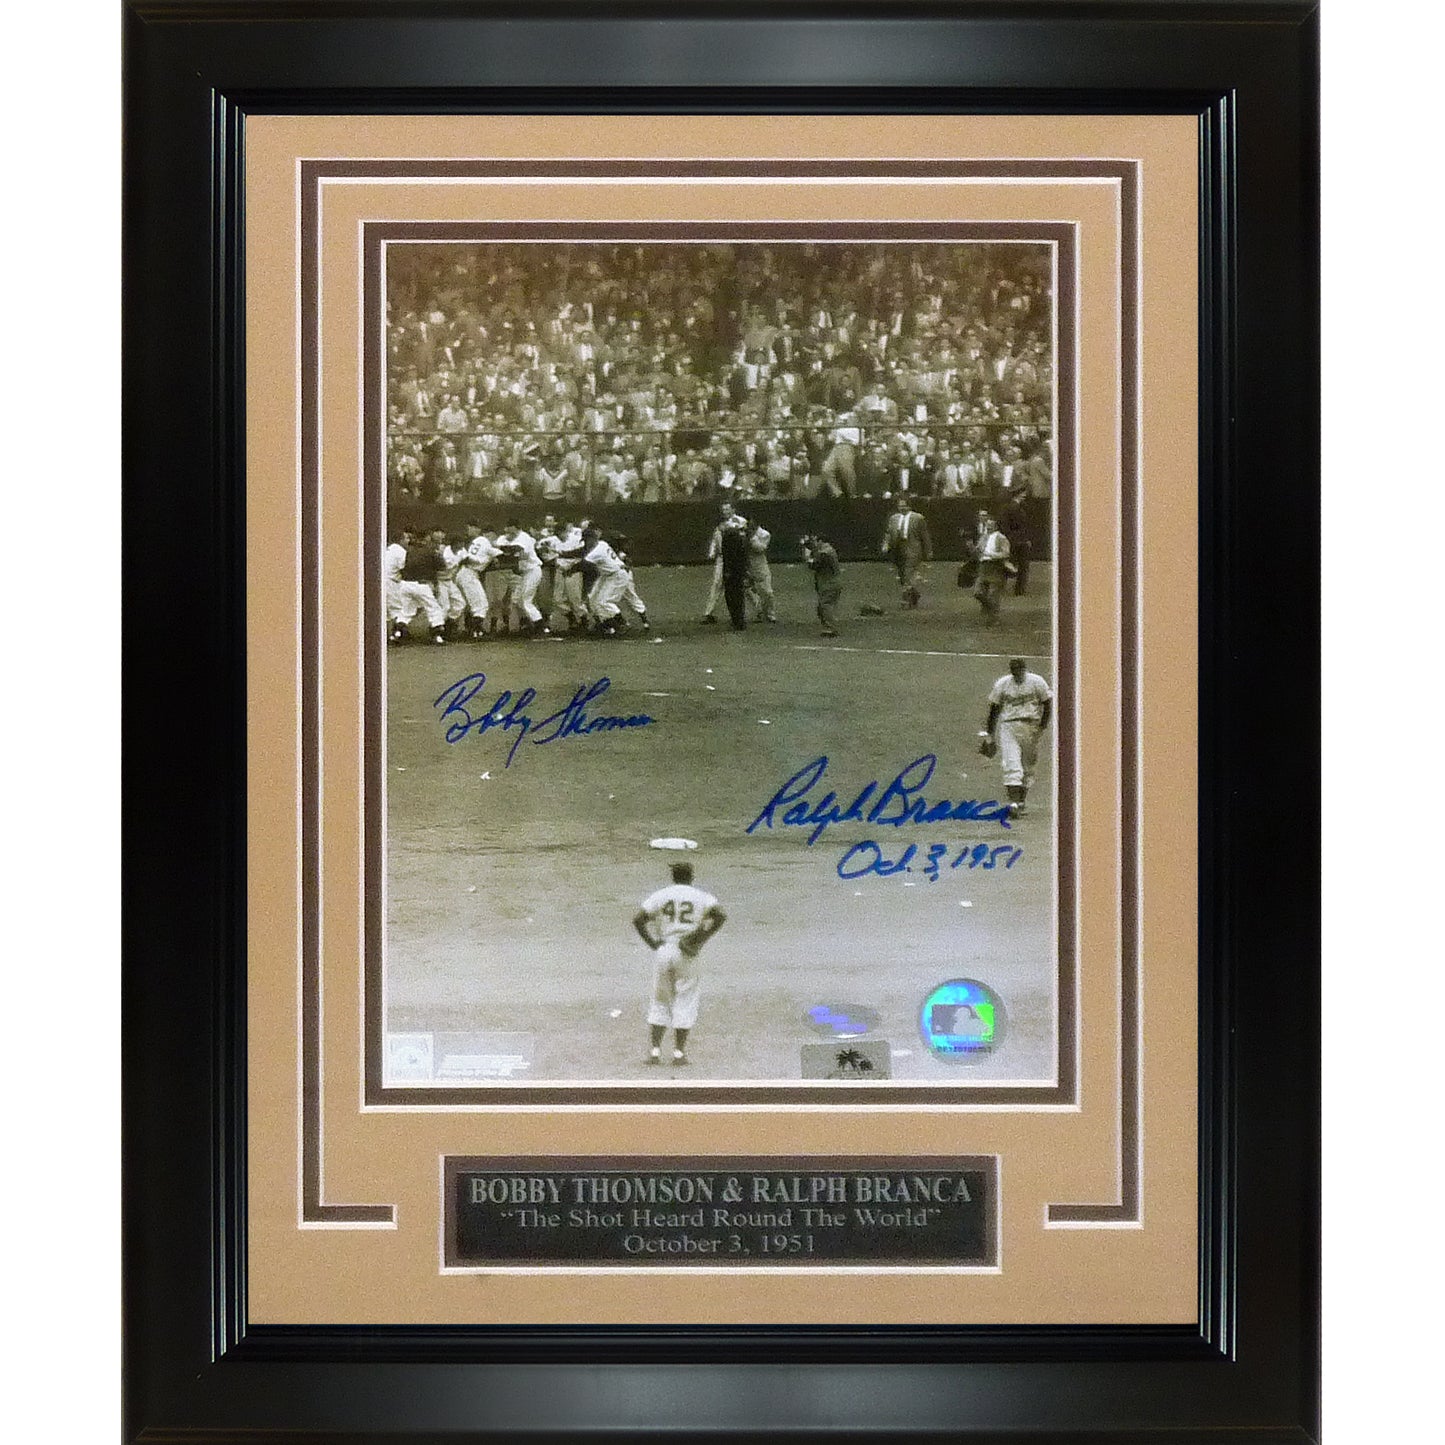 Ralph Branca and Bobby Thomson Dual Autographed "Shot Heard Round The World" (Vertical Jackie Robinson) Deluxe Framed 8x10 Photo w/ Inscription , Date